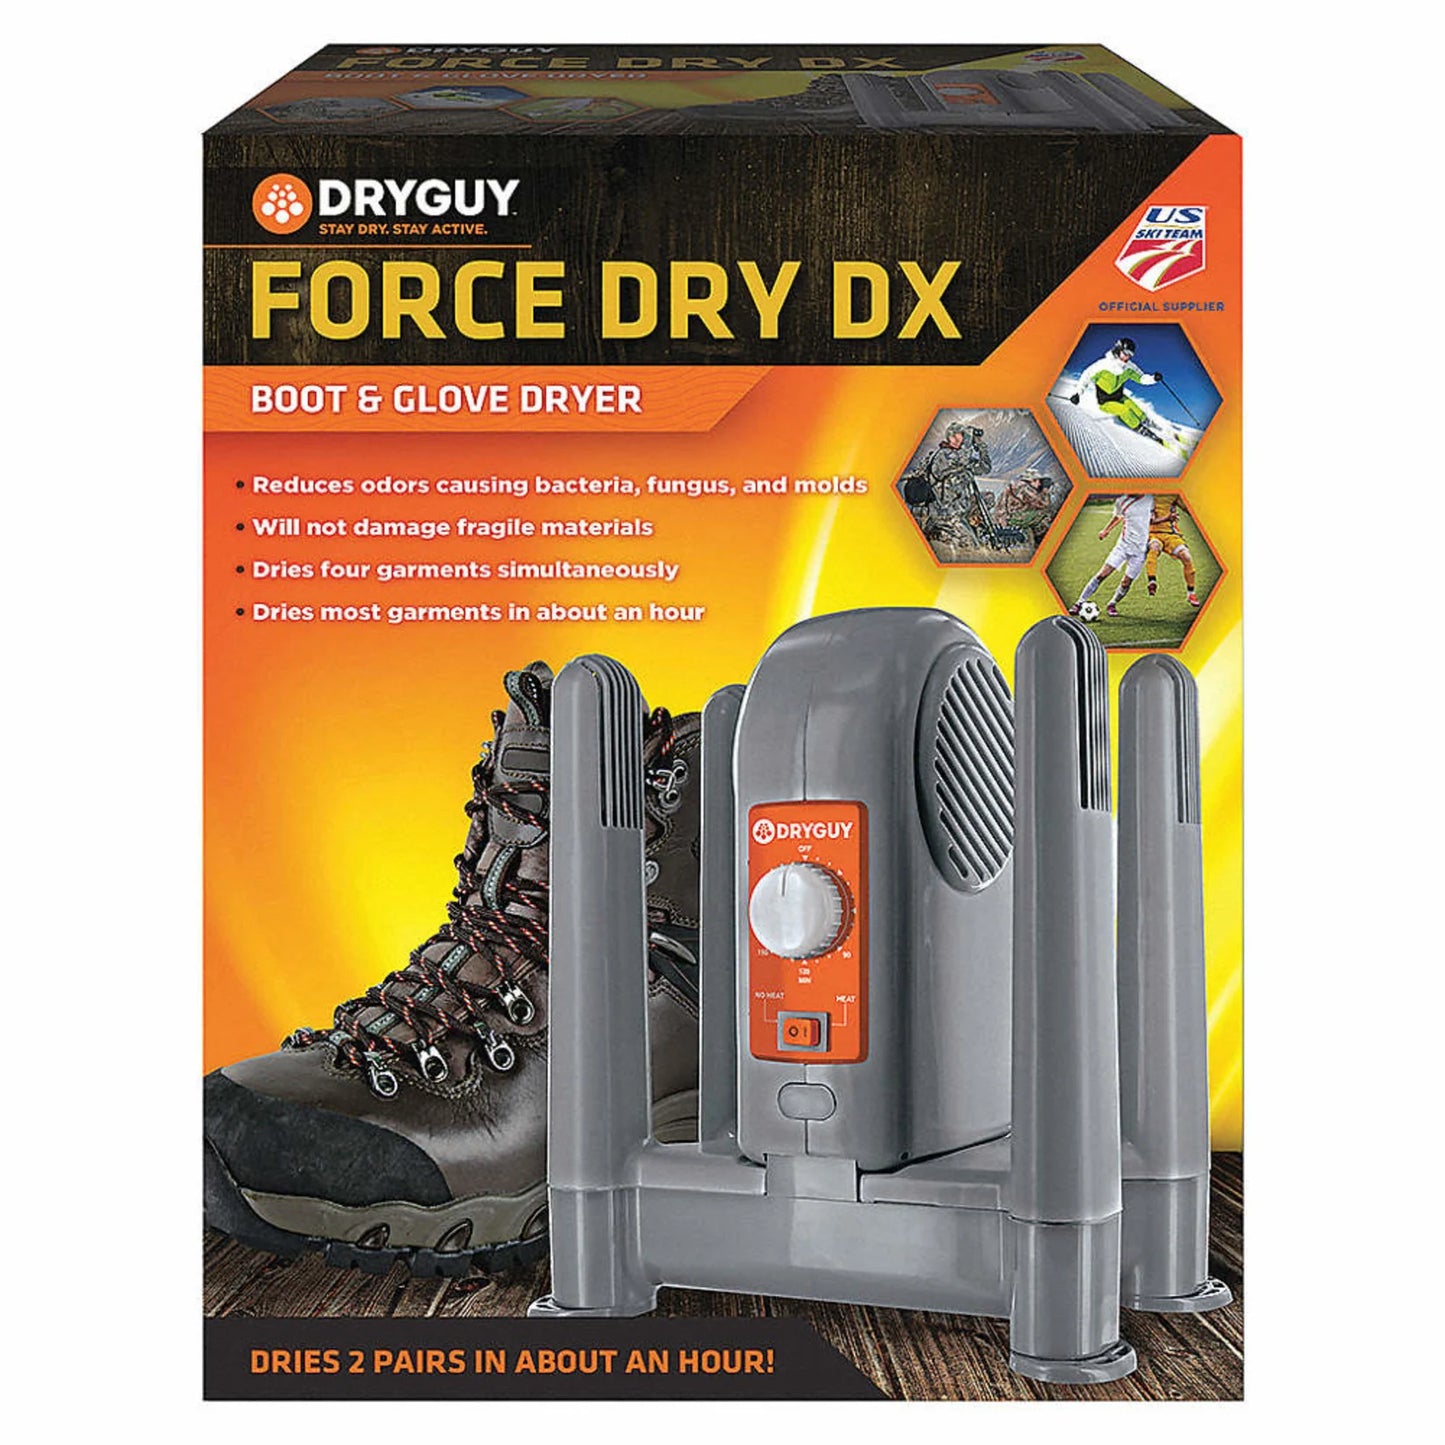 FORCE DRY DX